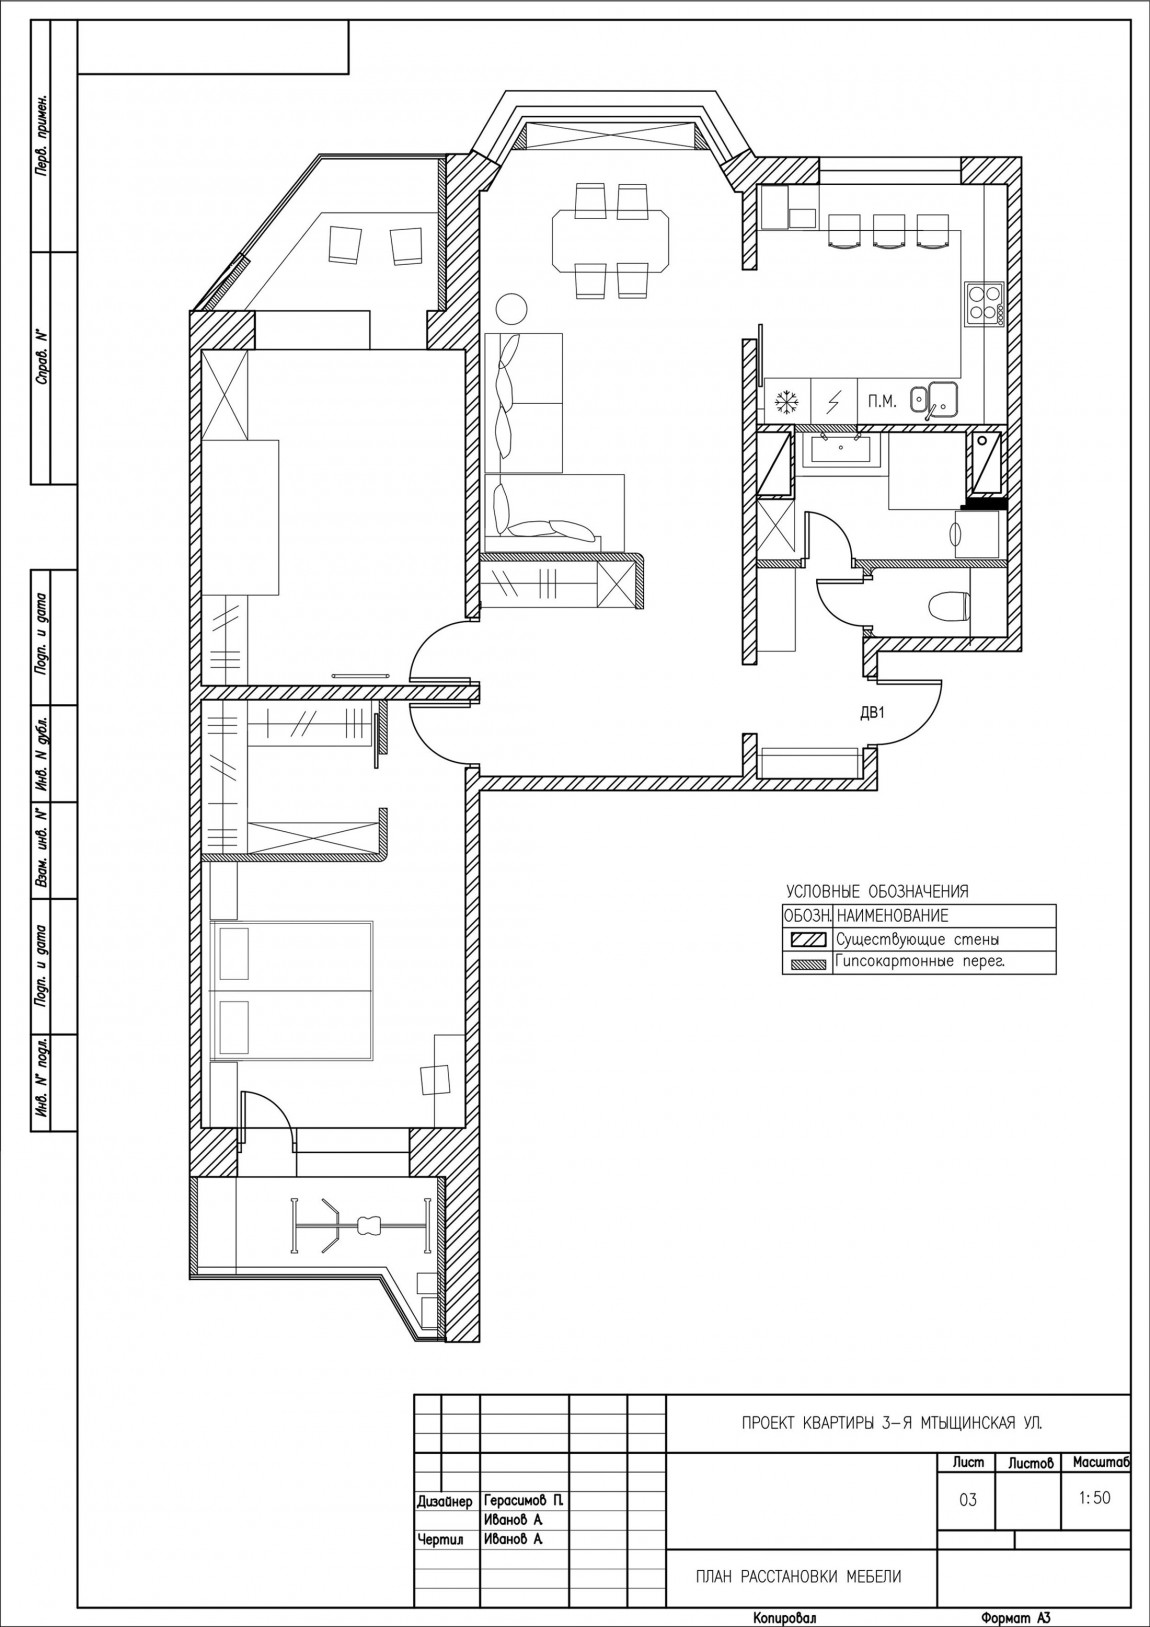 Floor plan of the Scandinavian style Moscow apartment